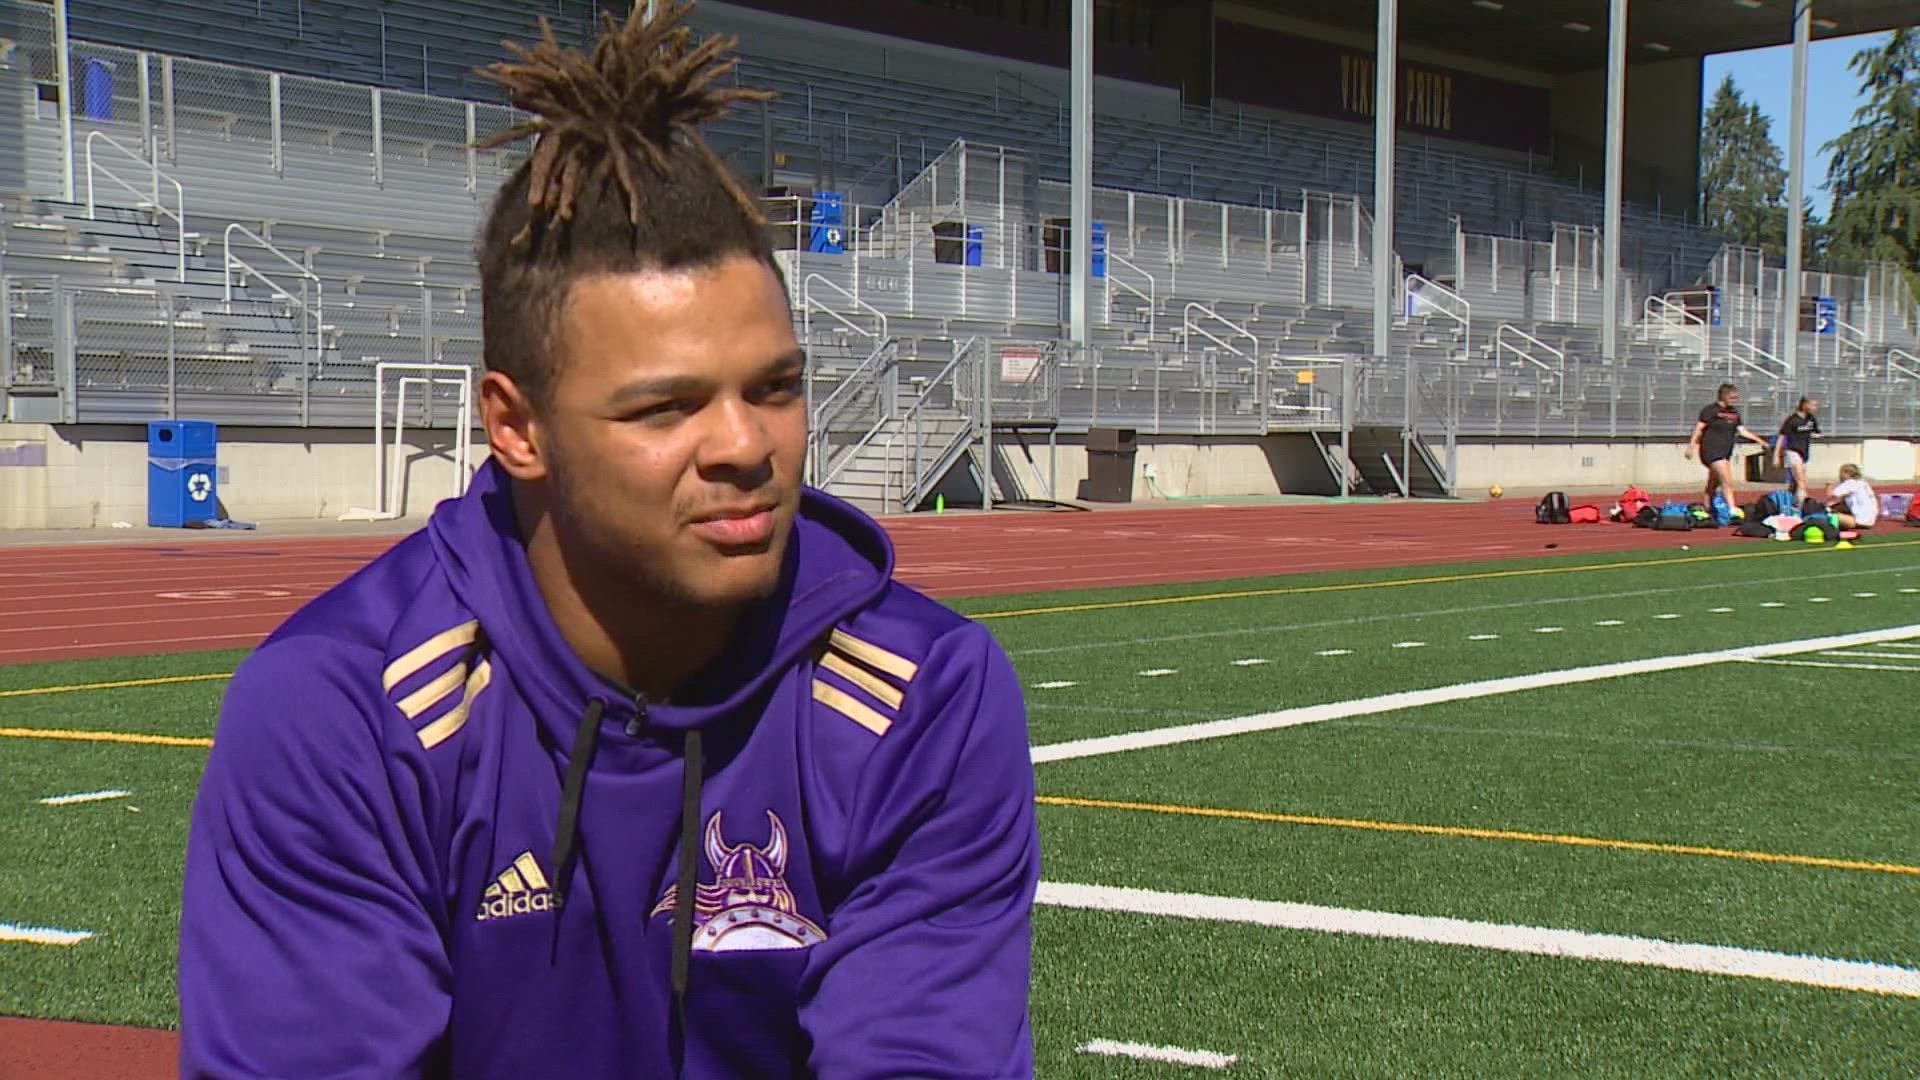 Lake Stevens running back Jayden Limar has already committed to Notre Dame ahead of his senior football season.